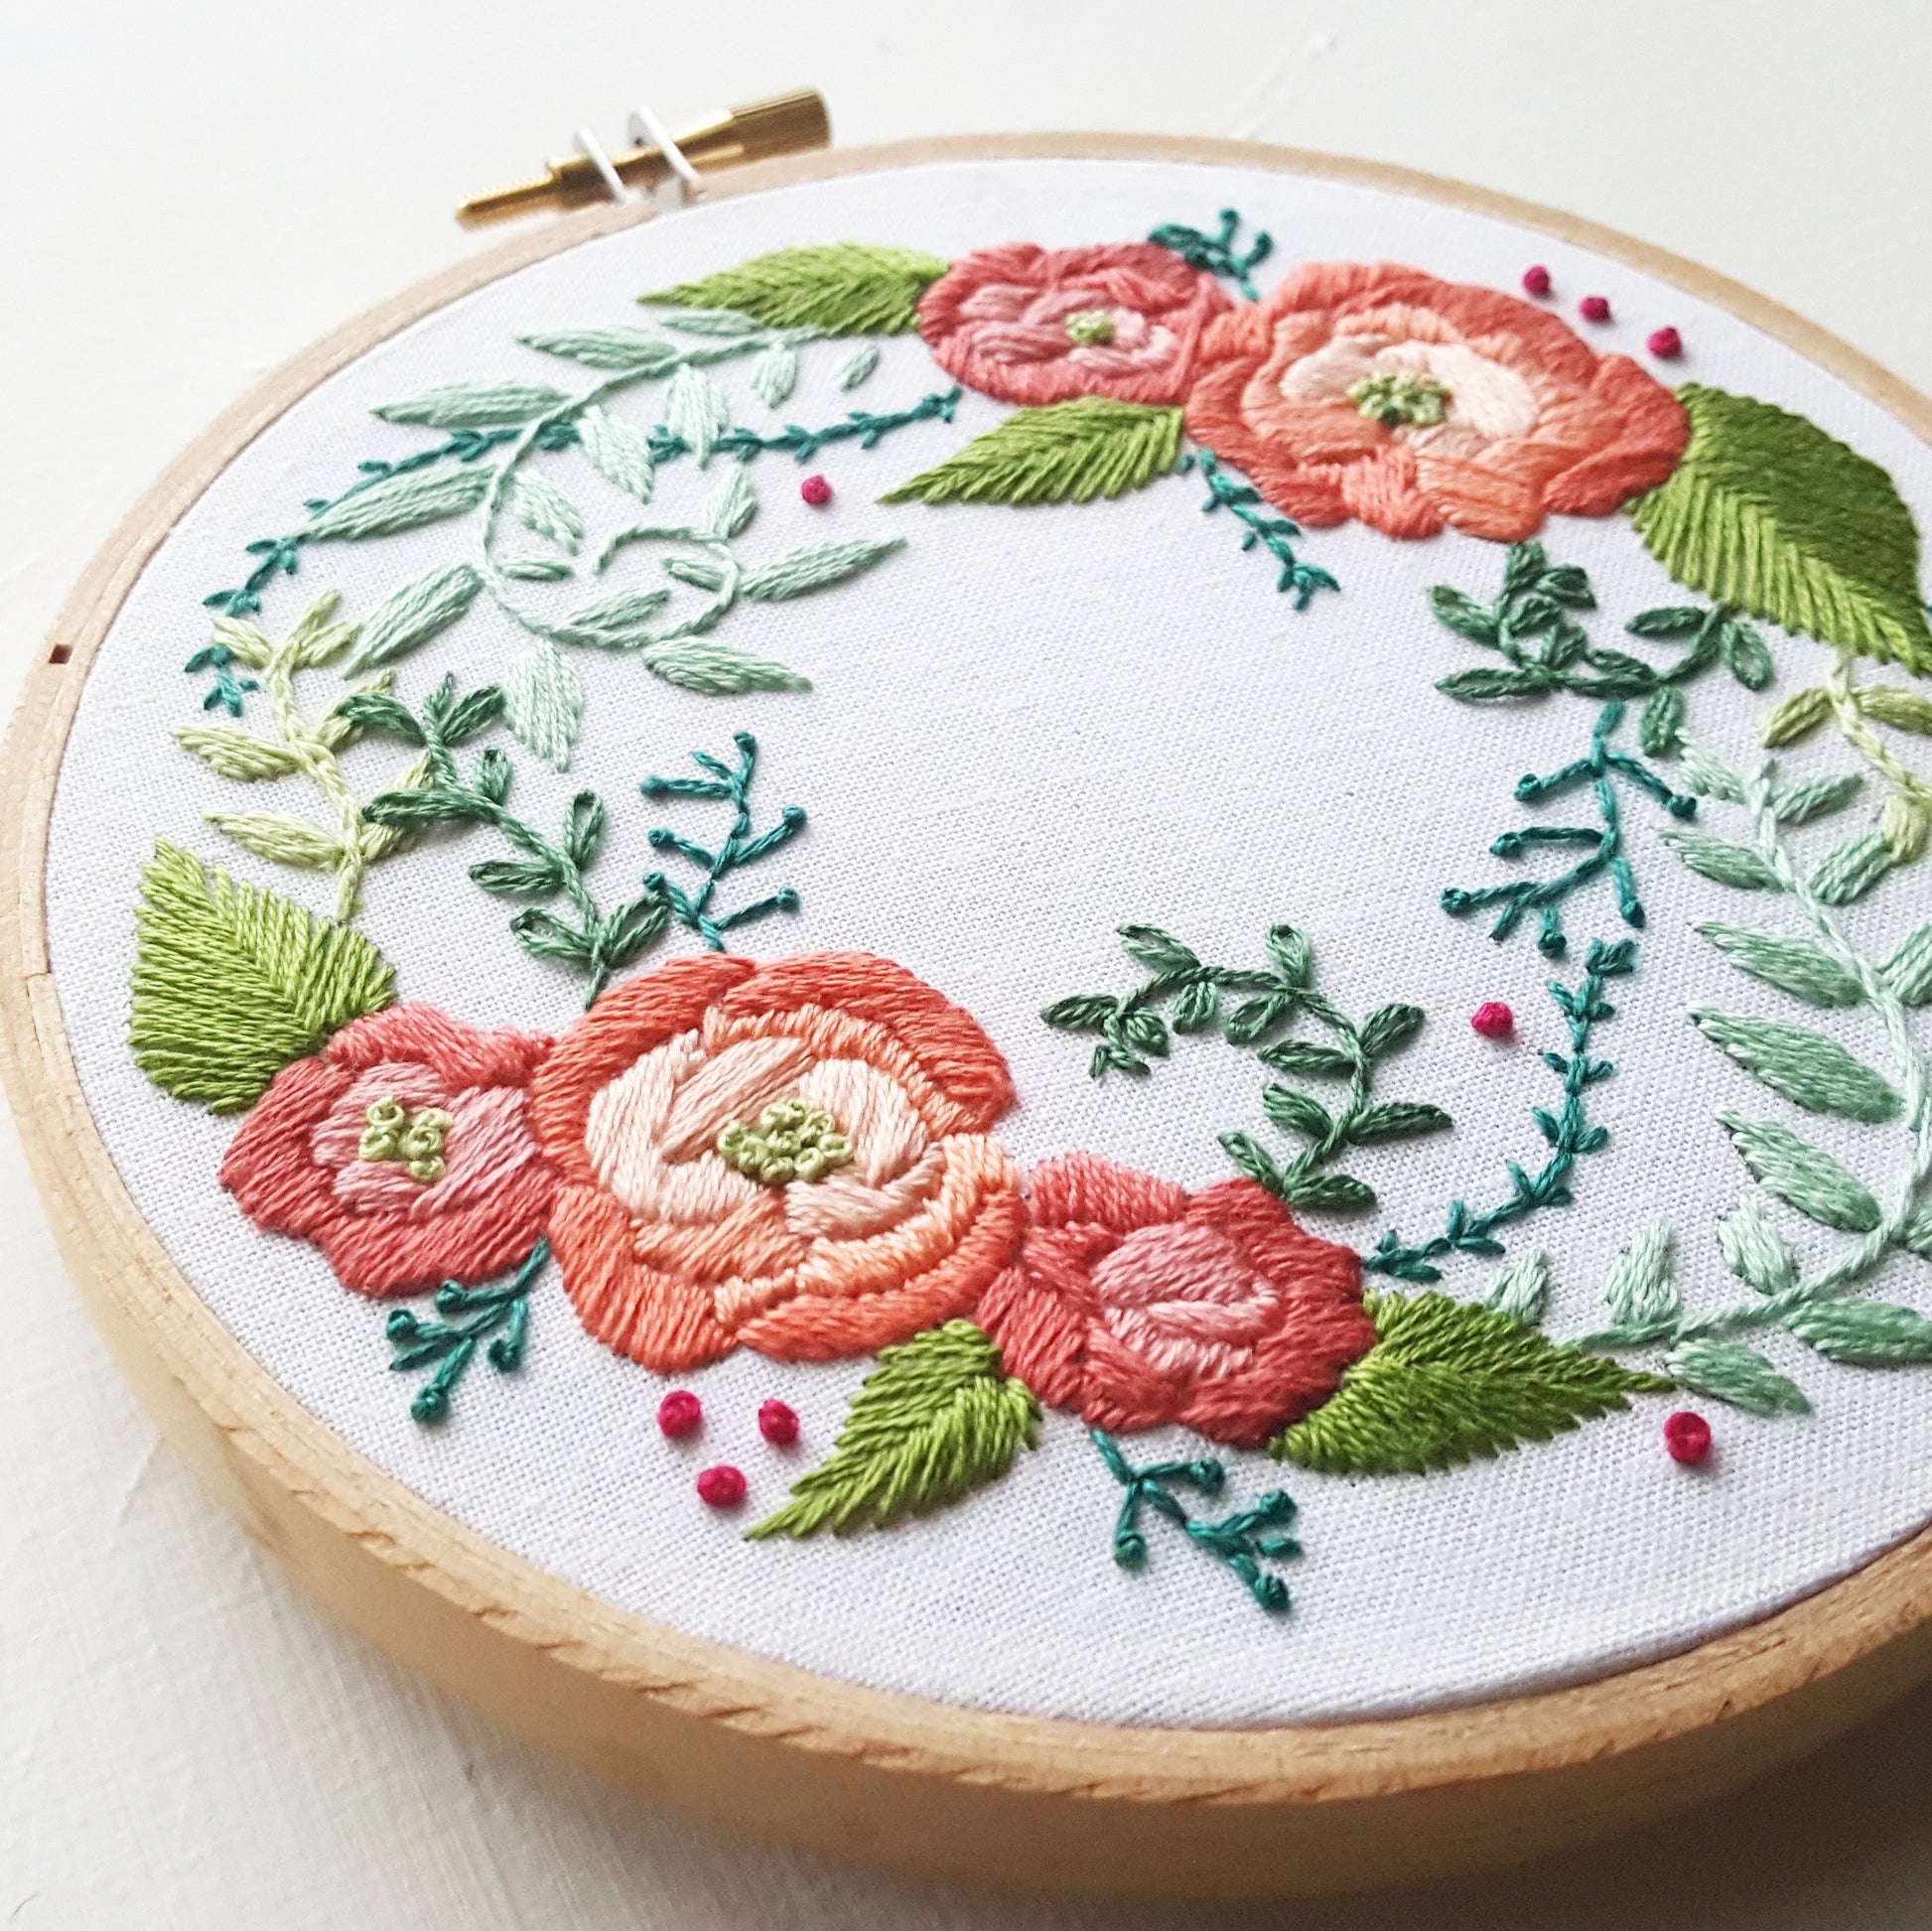 Floral Embroidery – Space and Material